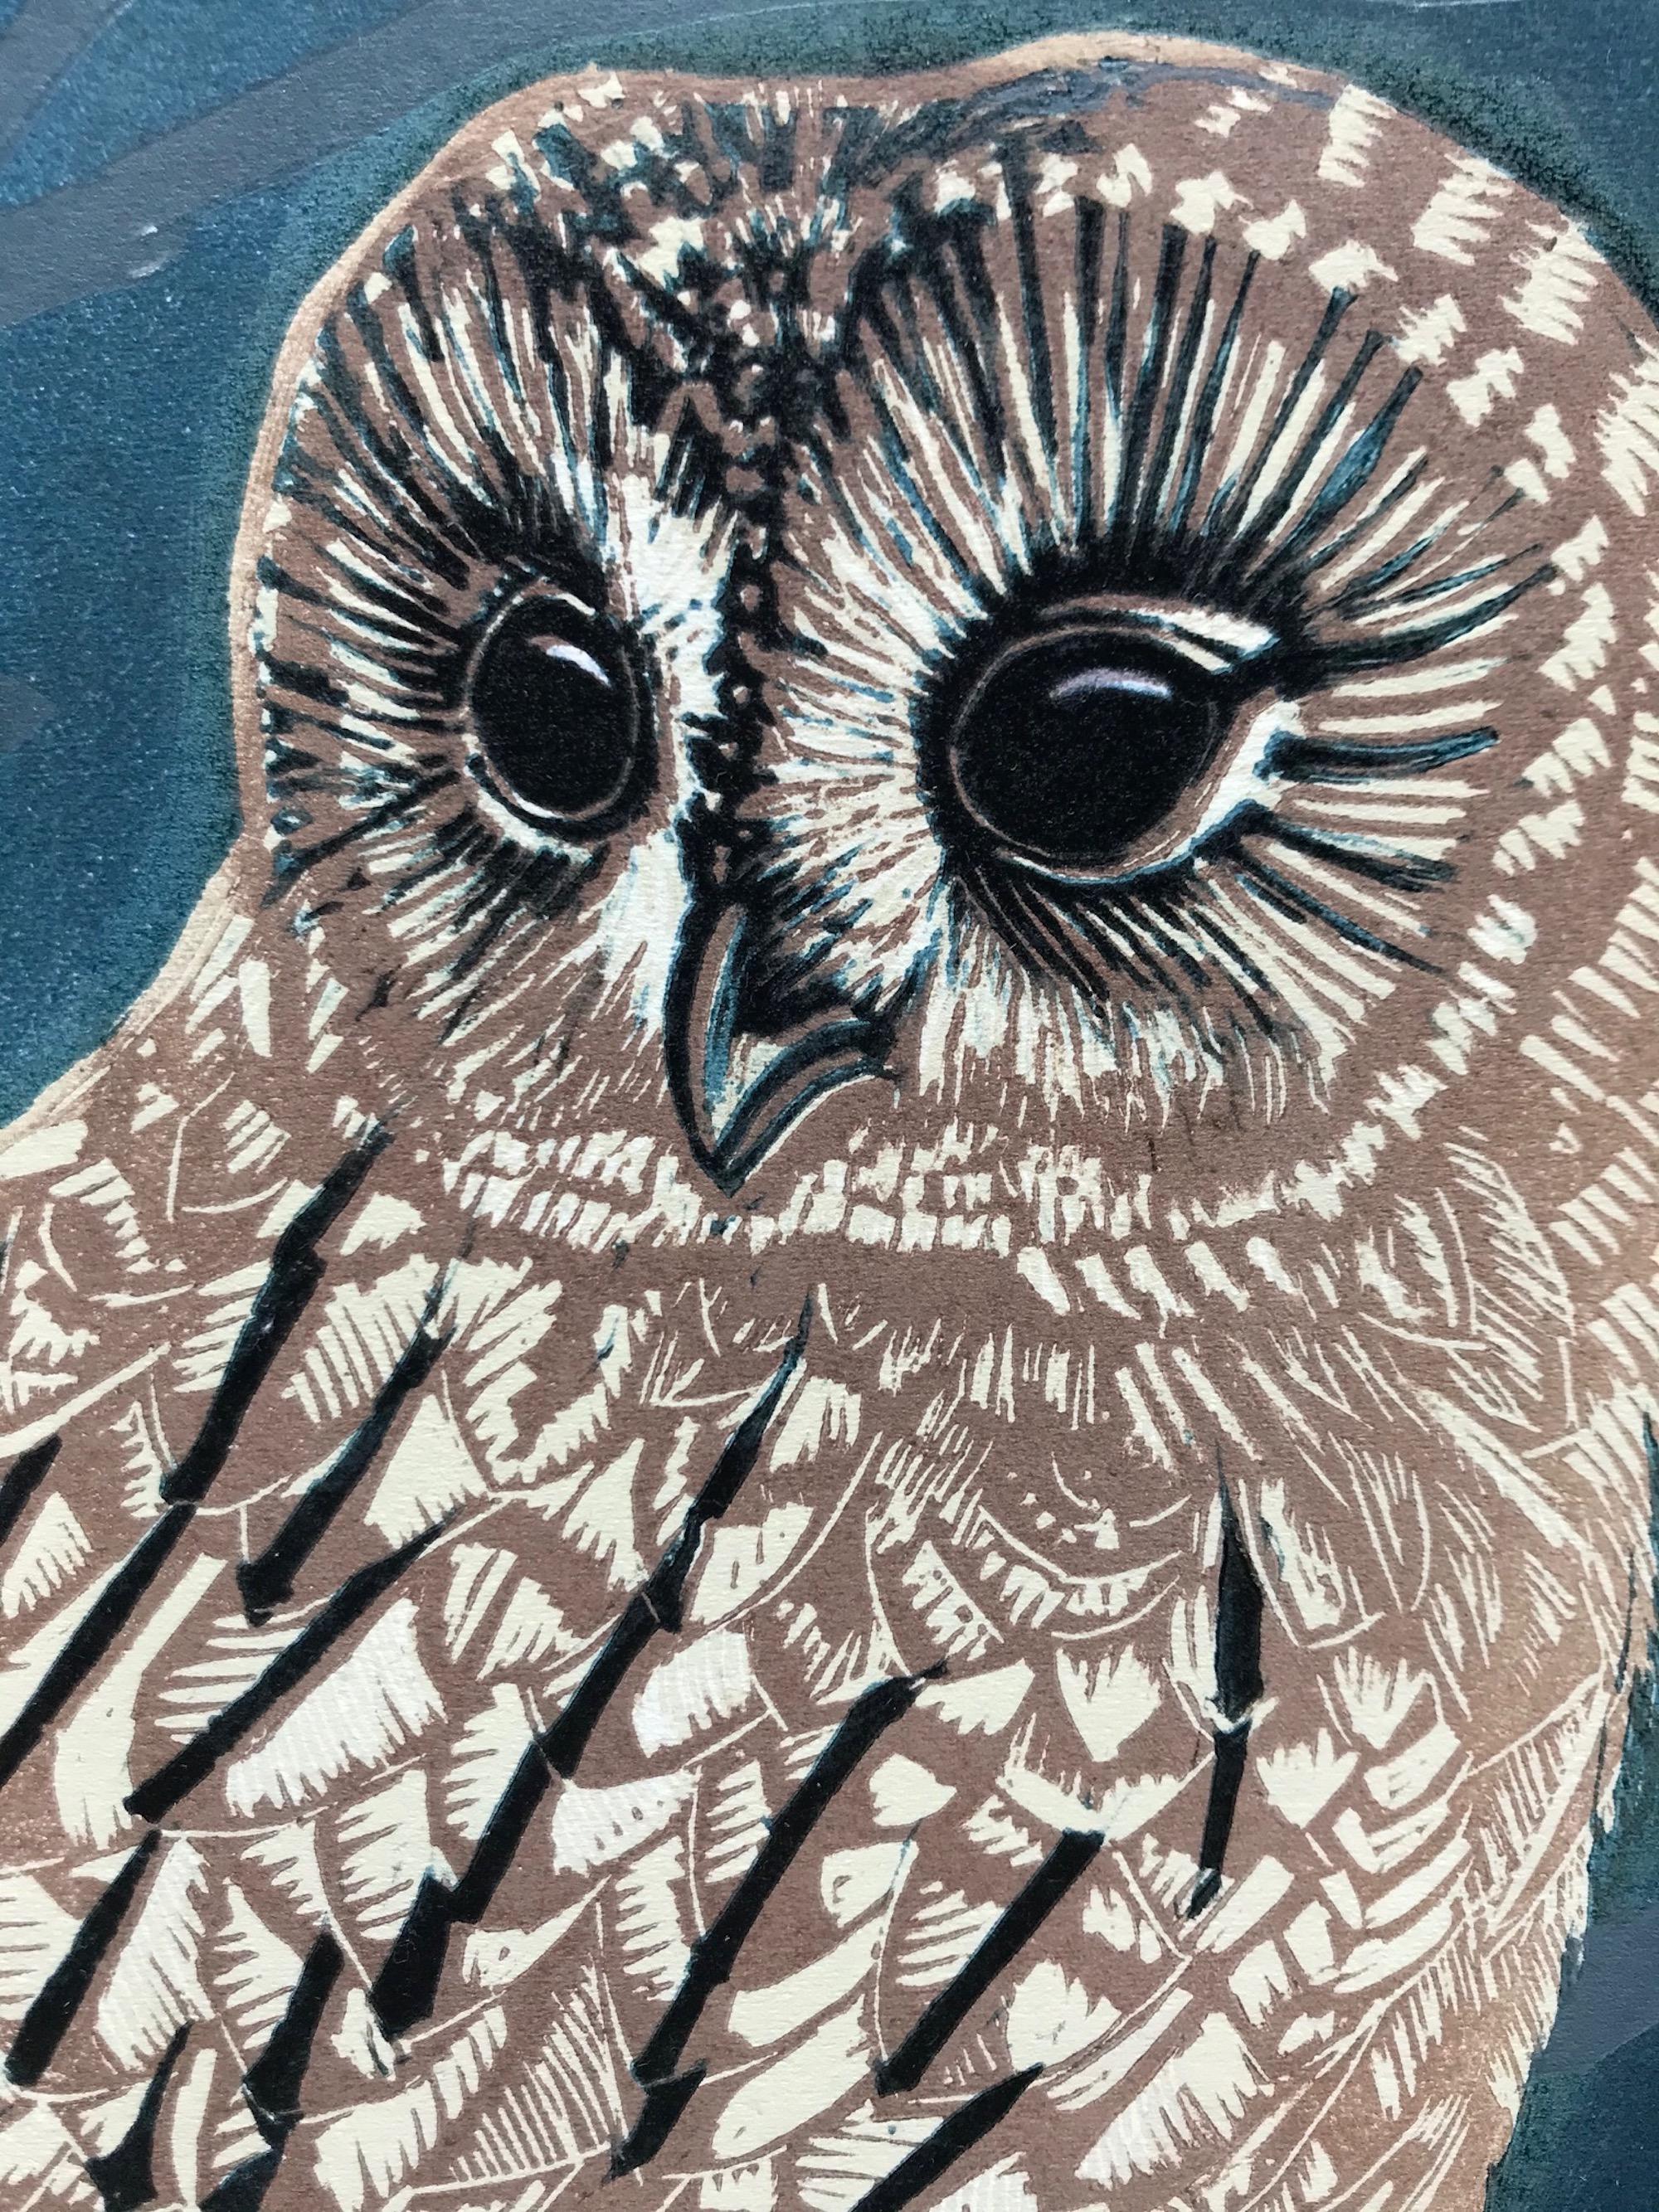 Yule
Limited Edition Linocut
Edition of 10
Image Size: H 32cm x W 42cm
Signed
Sold Mounted but Unframed

'Yule' represents both the end and the beginning of the turning of the wheel. the Tawny owl sits in the beech tree watching and waiting, he